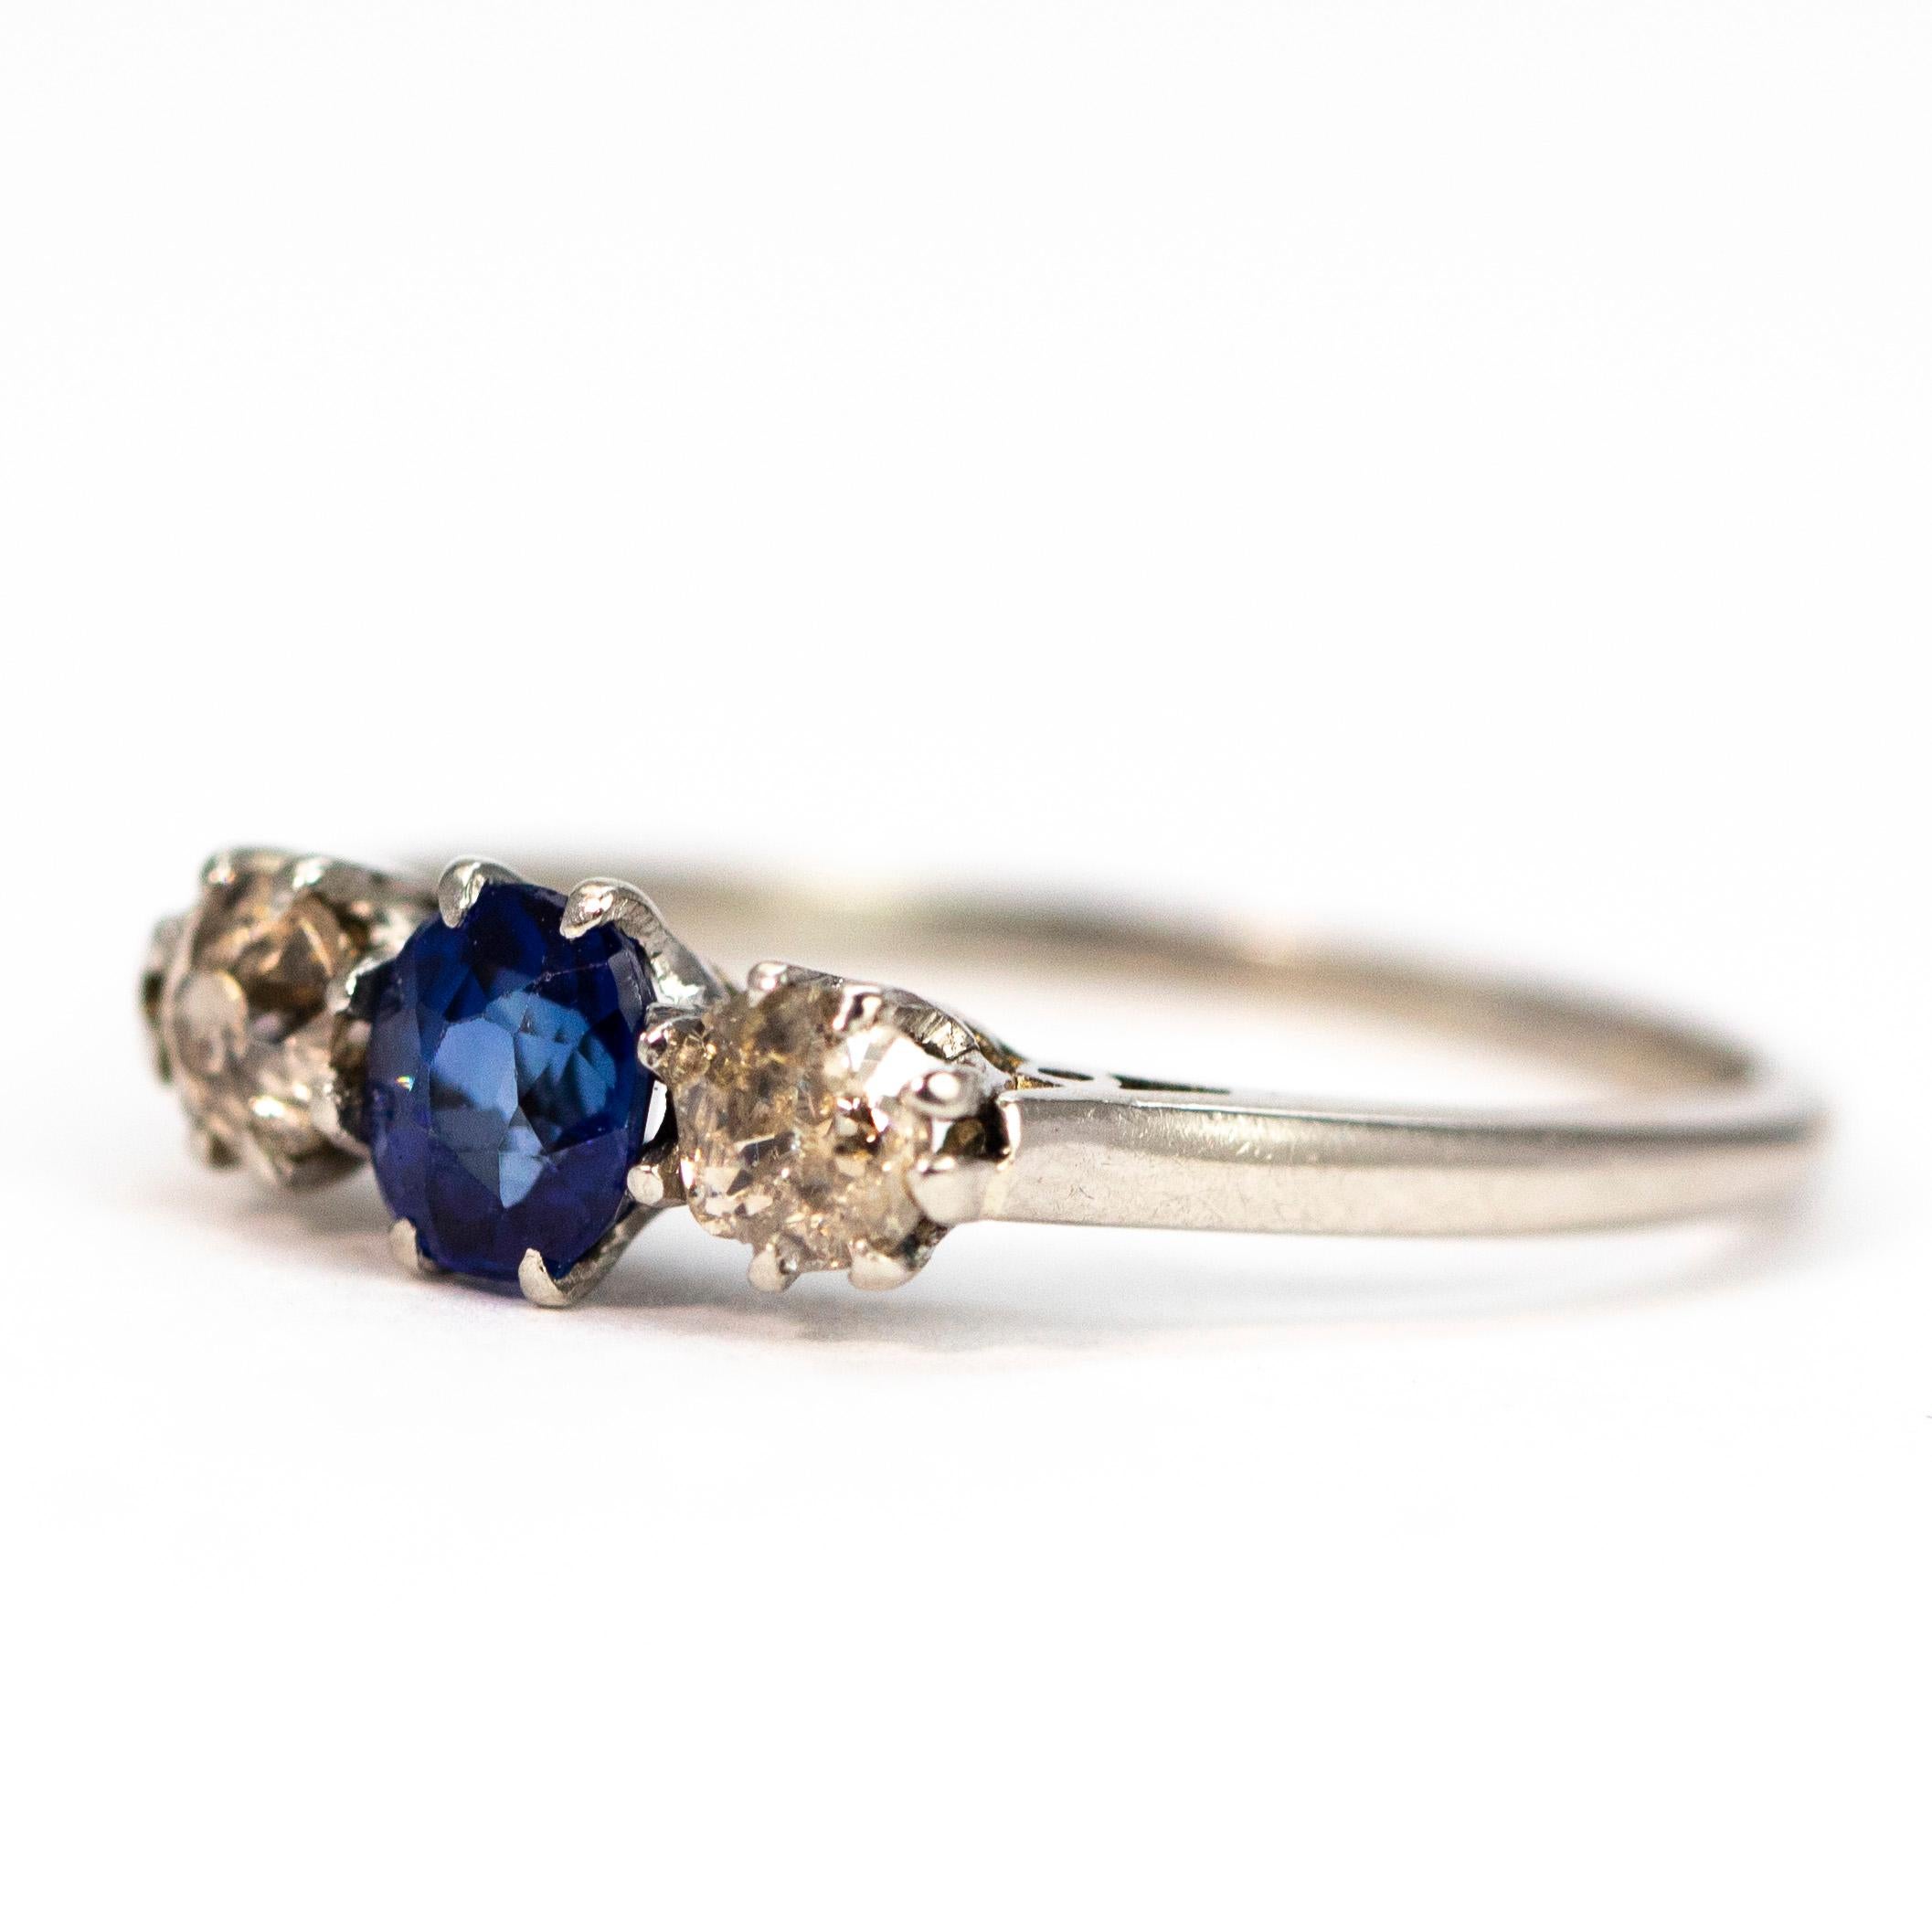 This three stone ring hold a central sapphire which is a lovely bright blue colour and measures 30pts. Either side of this central stone is a diamond which measures 15pts each and are bright and sparkly. The ring is modelled in platinum.

Ring Size: